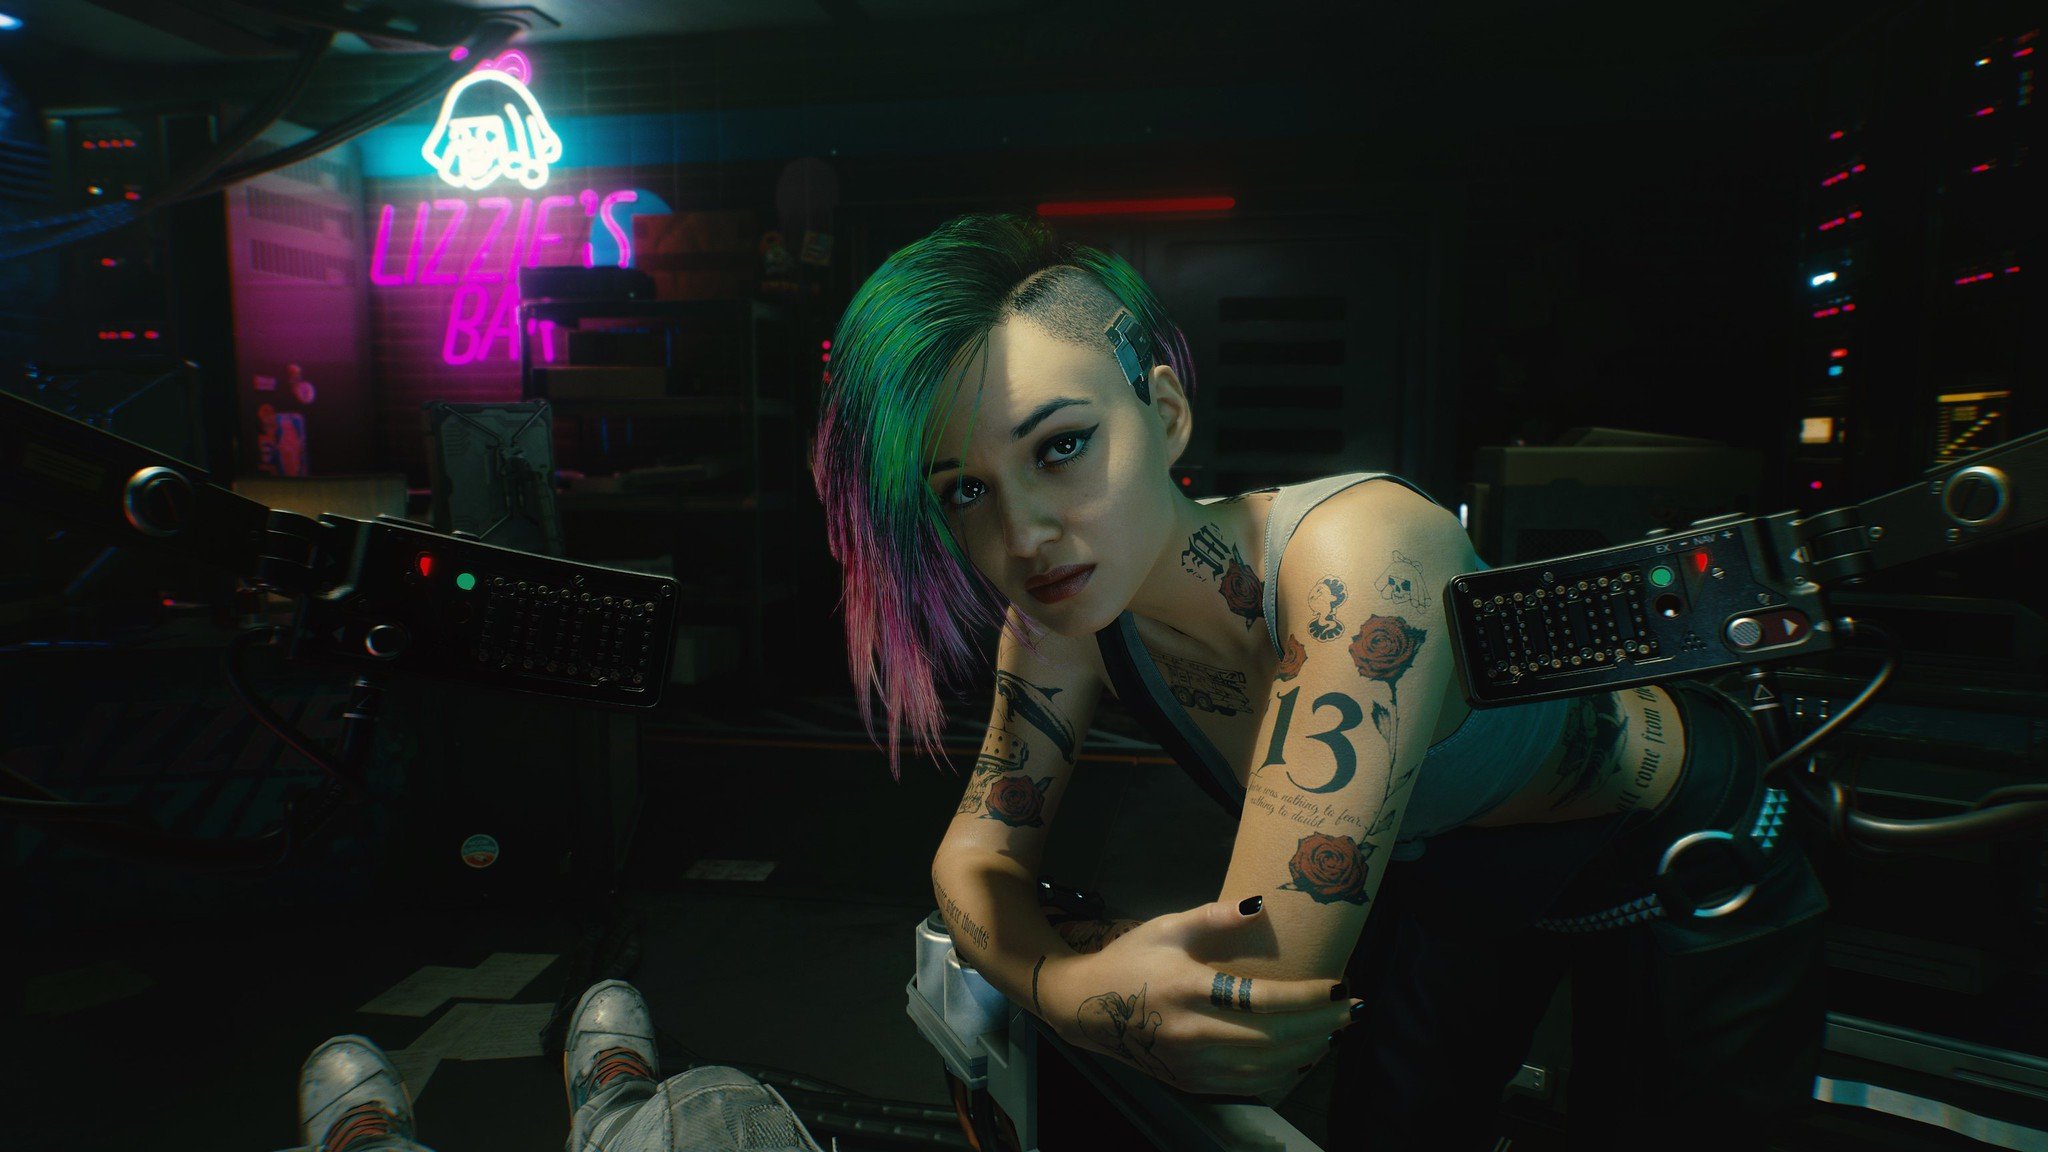 Cyberpunk 2077 PS4 review: CDPR's vision is heavily compromised on old  consoles